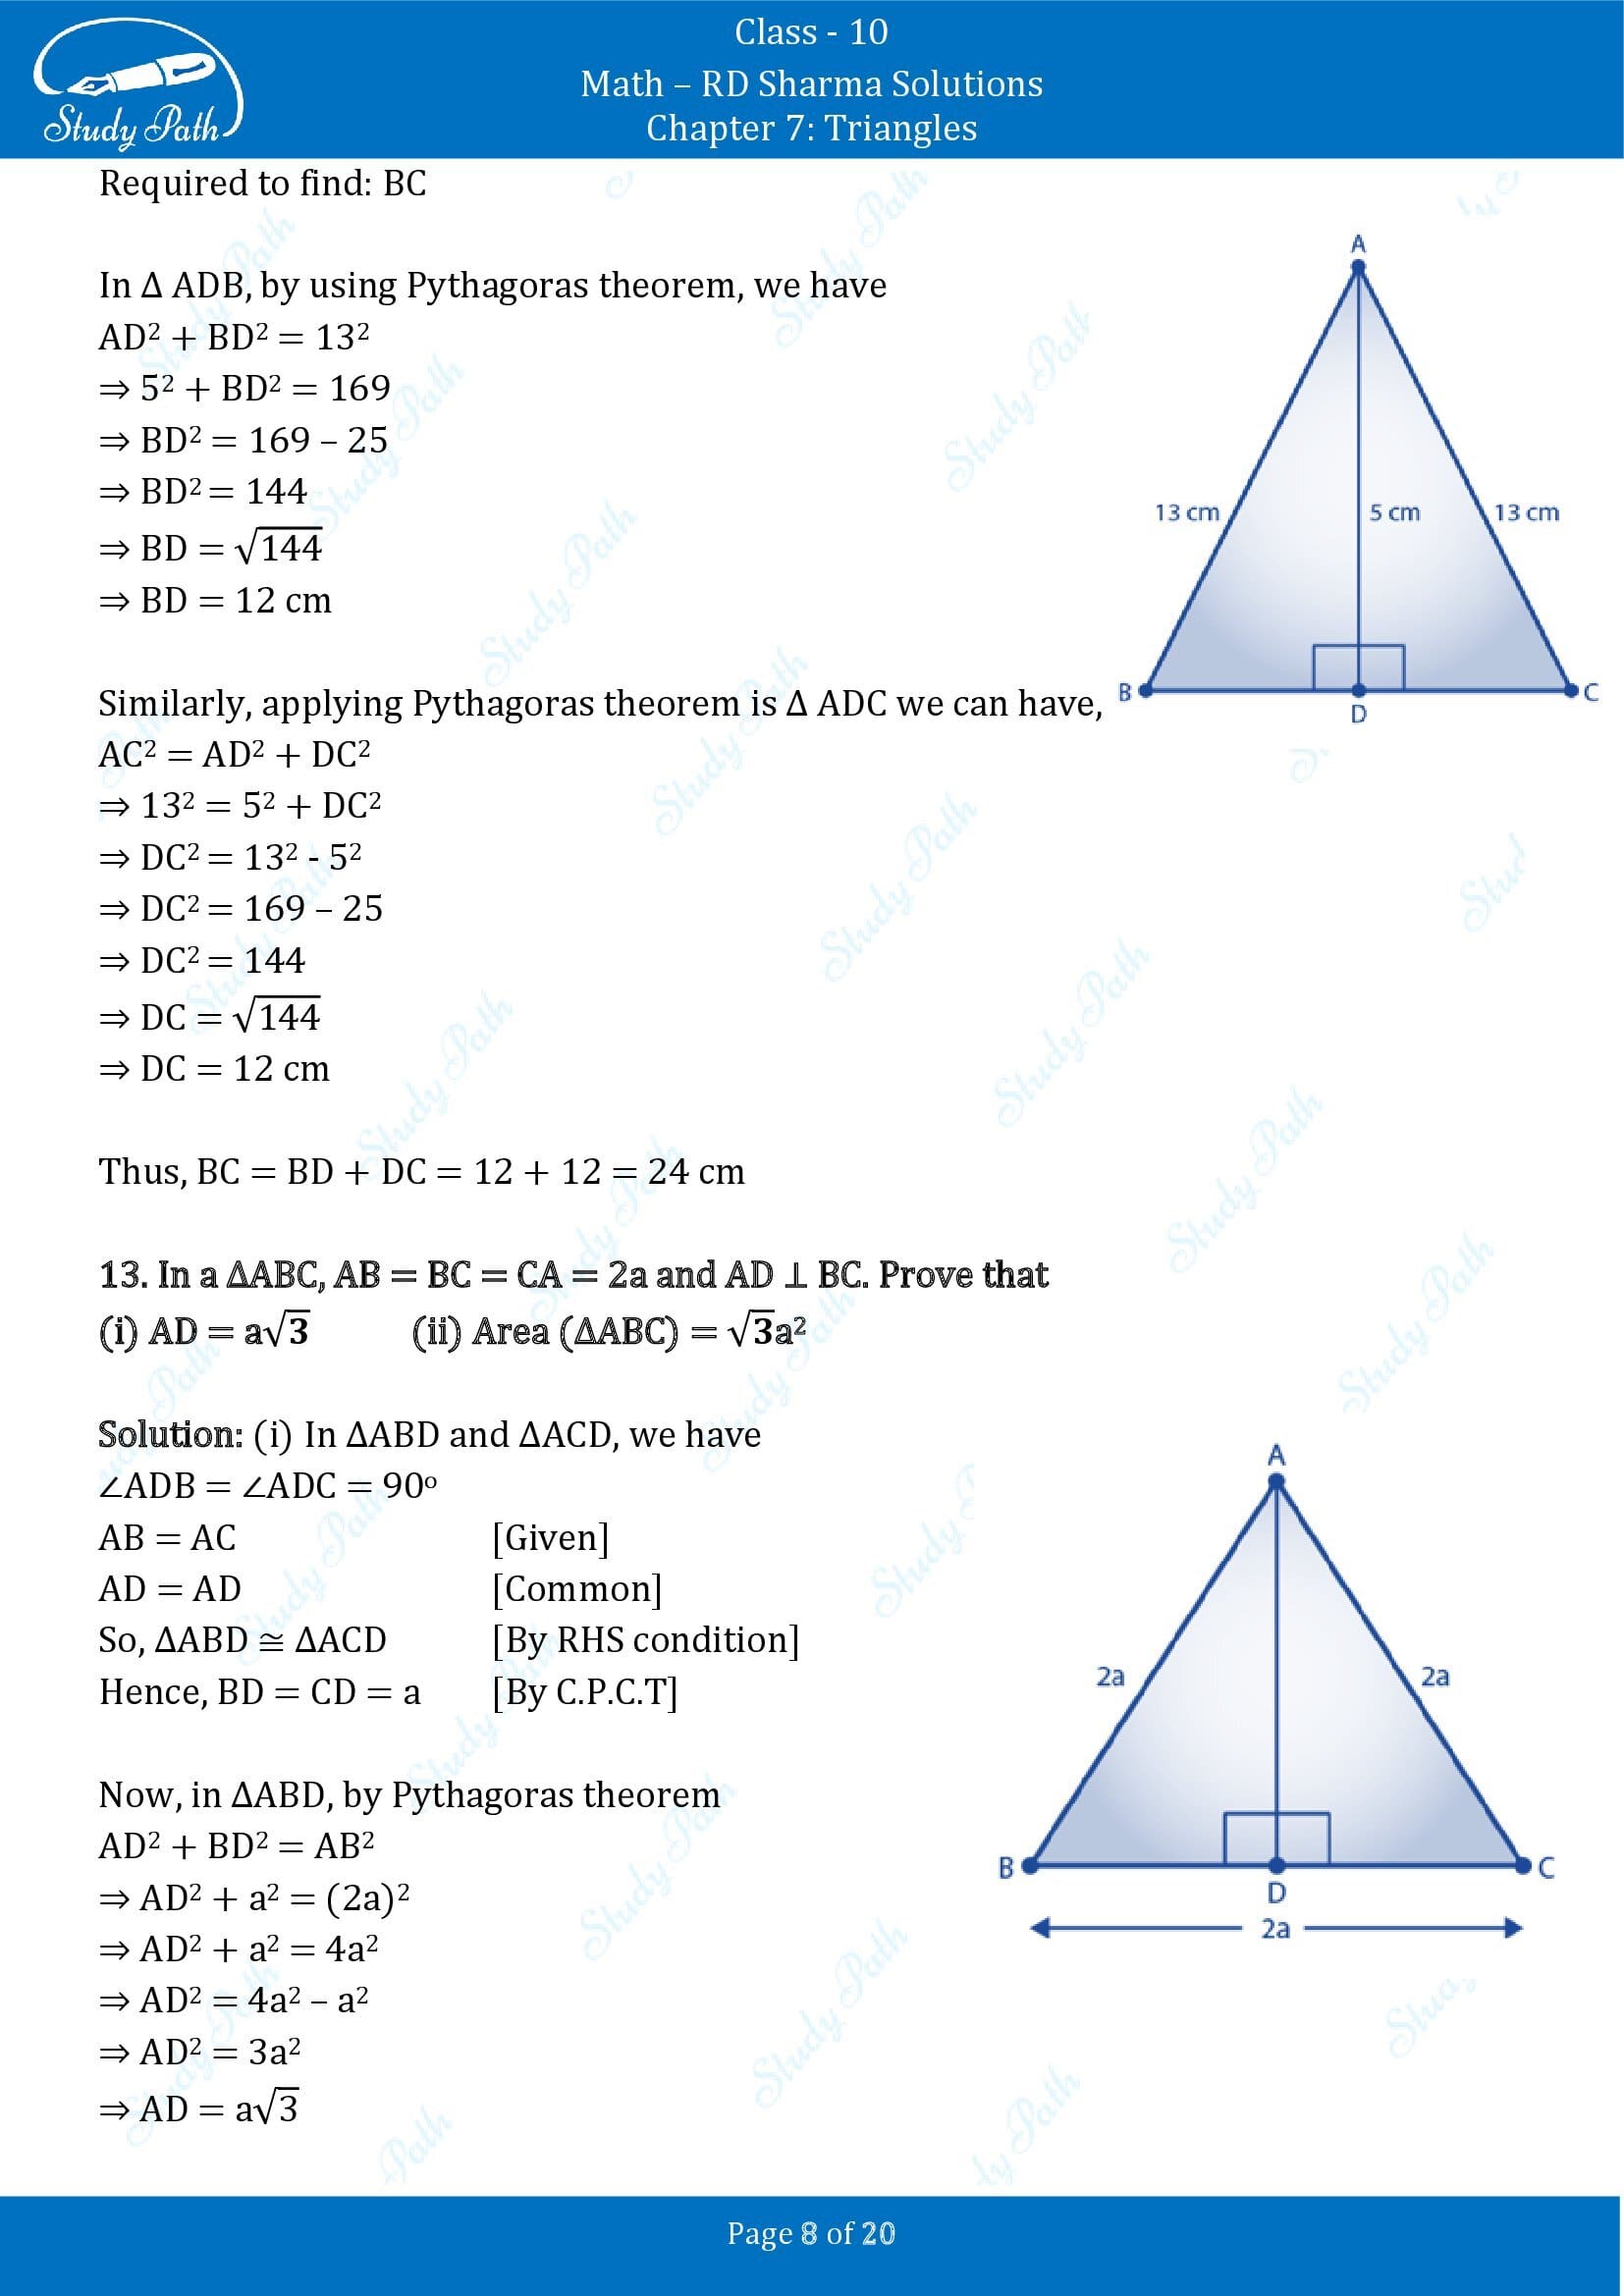 RD Sharma Solutions Class 10 Chapter 7 Triangles Exercise 7.7 00008